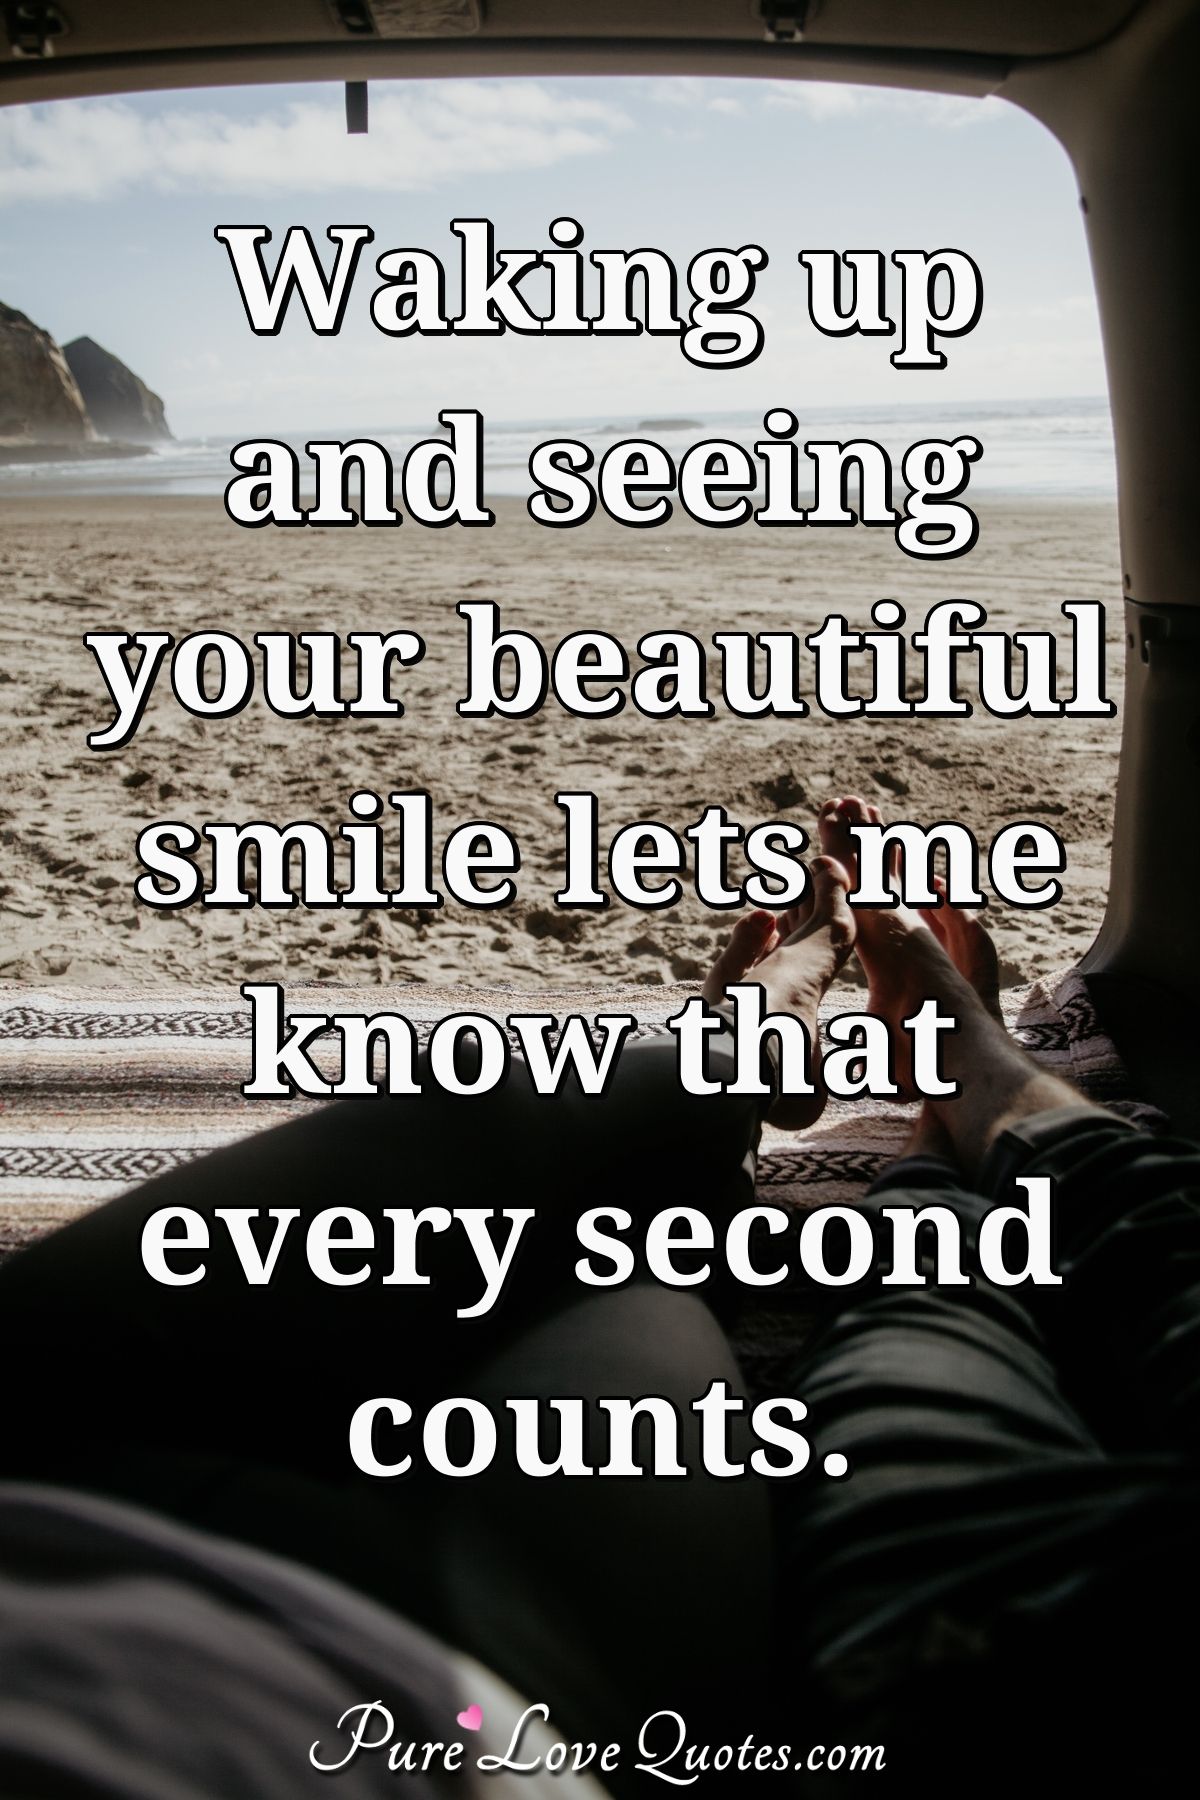 Waking up and seeing your beautiful smile lets me know that every second counts. - Anonymous